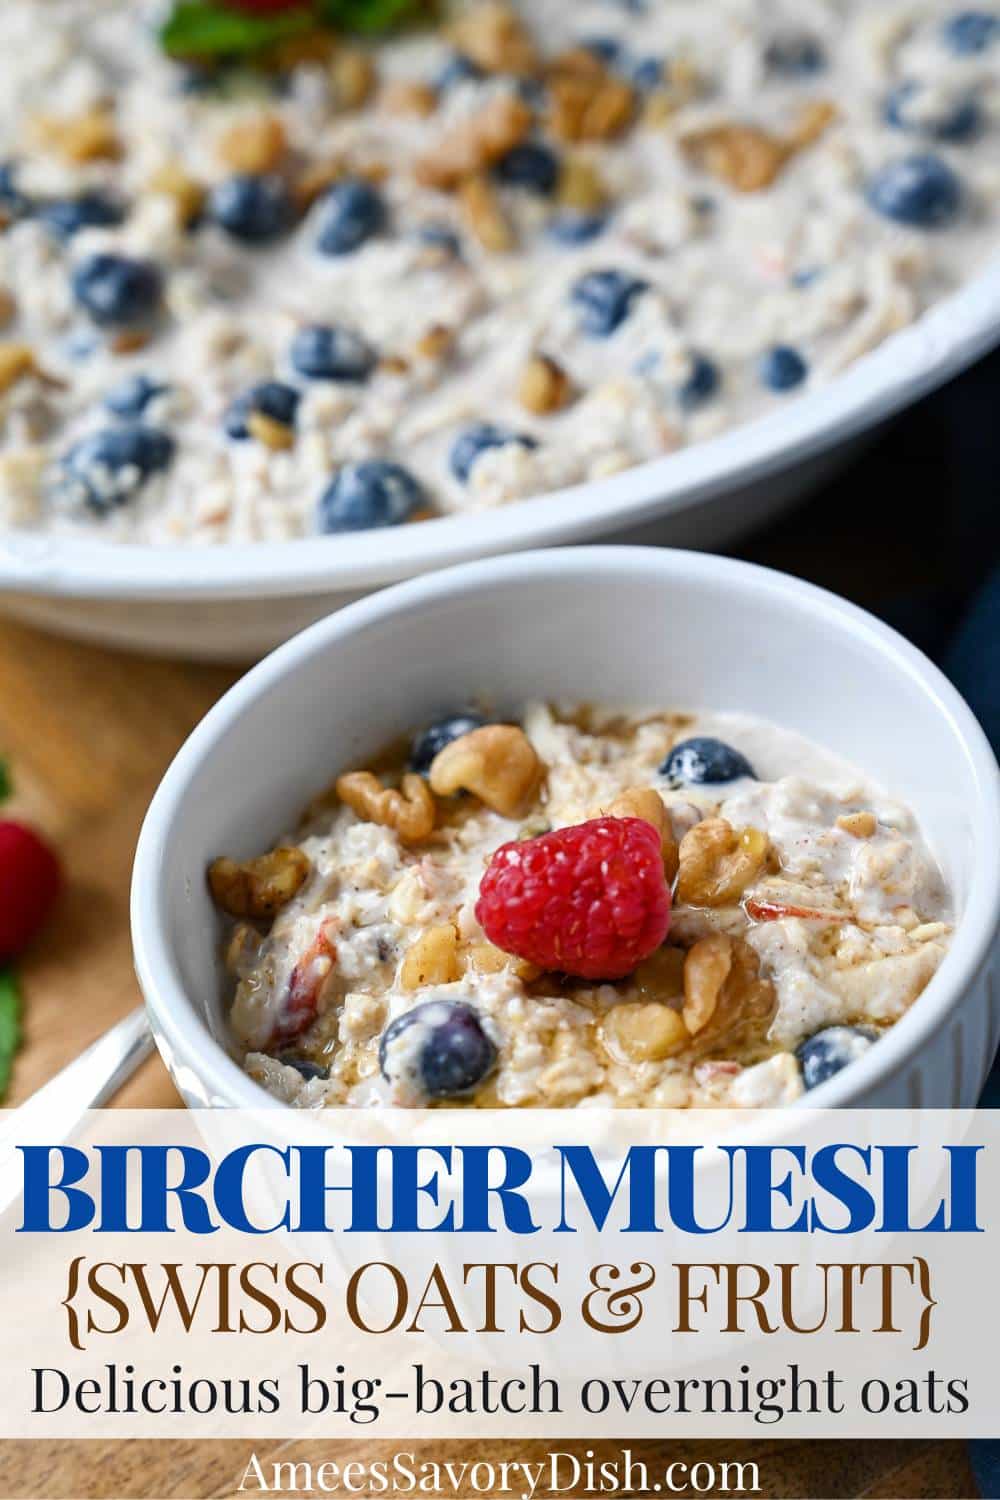 These big-batch overnight oats {aka Bircher muesli} are a breeze to throw together and make a healthy hearty breakfast. via @Ameessavorydish